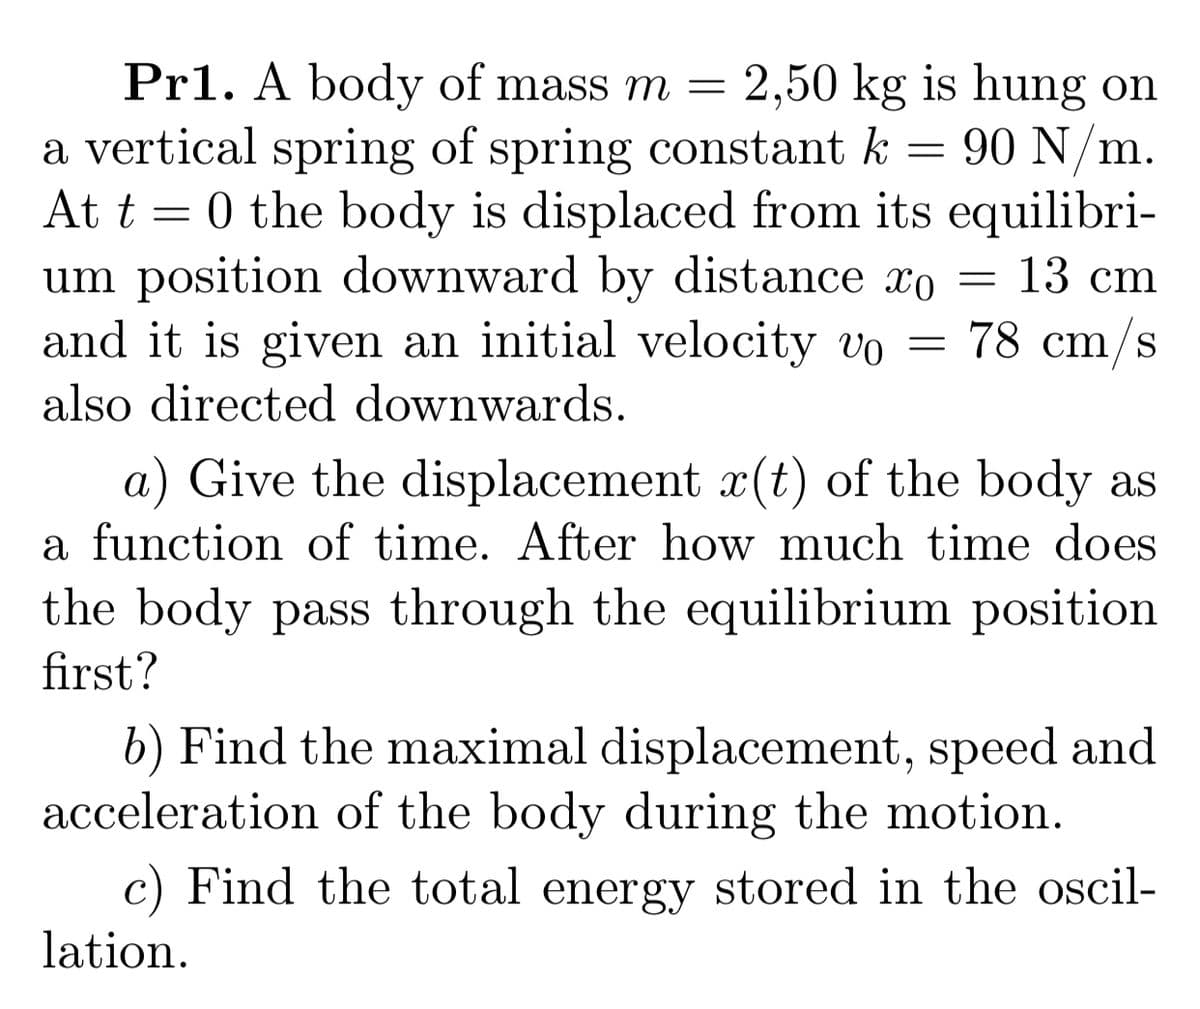 Pr1. A body of mass m =
a vertical spring of spring constant k = 90 N/m.
At t = 0 the body is displaced from its equilibri-
um position downward by distance xo
and it is given an initial velocity vo =
2,50 kg is hung on
13 cm
78 cm/s
also directed downwards.
a) Give the displacement x(t) of the body as
a function of time. After how much time does
the body pass through the equilibrium position
first?
b) Find the maximal displacement, speed and
acceleration of the body during the motion.
c) Find the total energy stored in the oscil-
lation.
